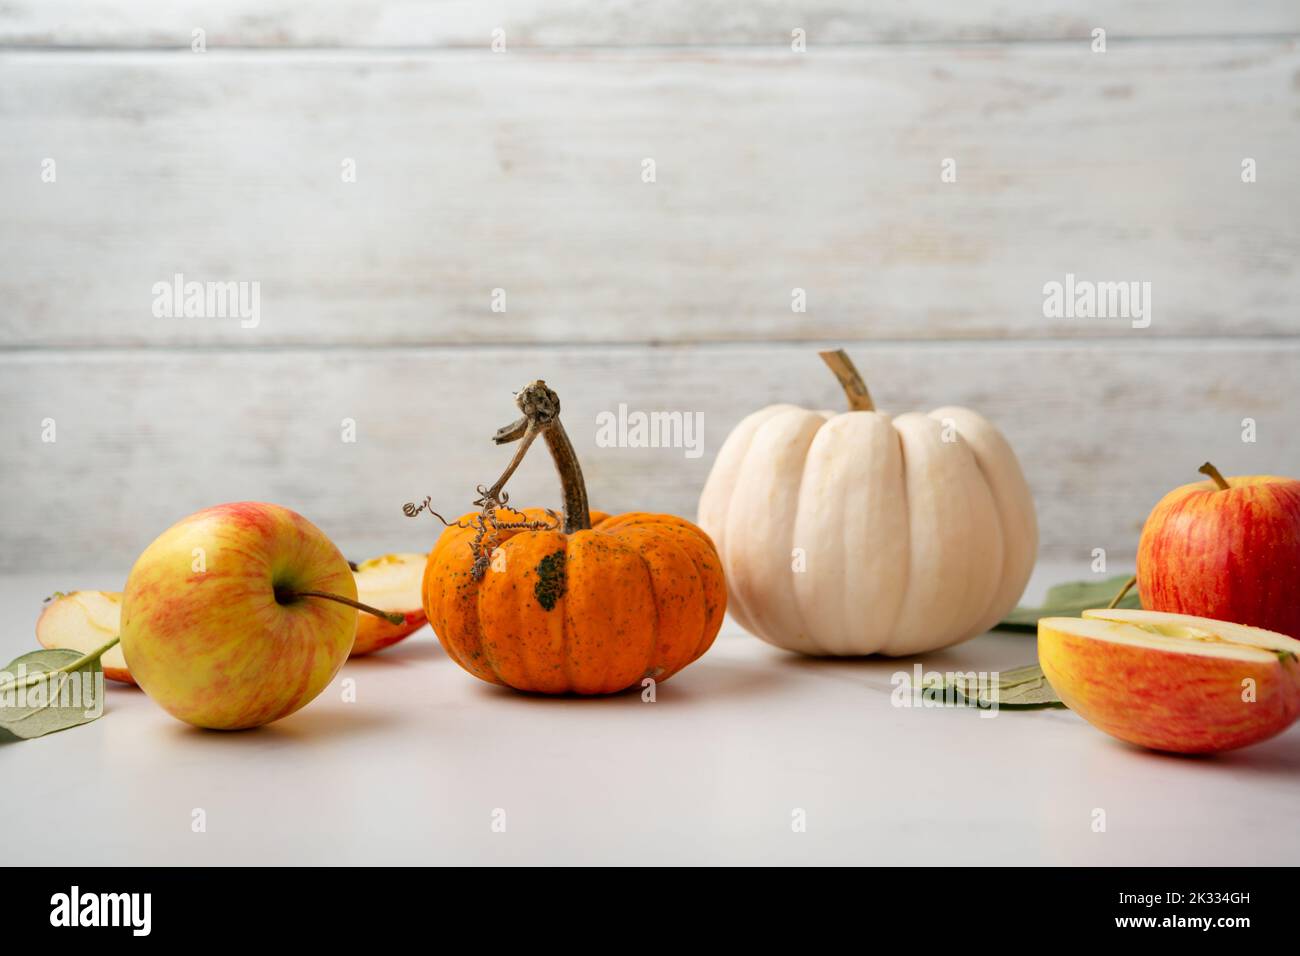 Small pumpkins and apples on light surface copy space food Stock Photo